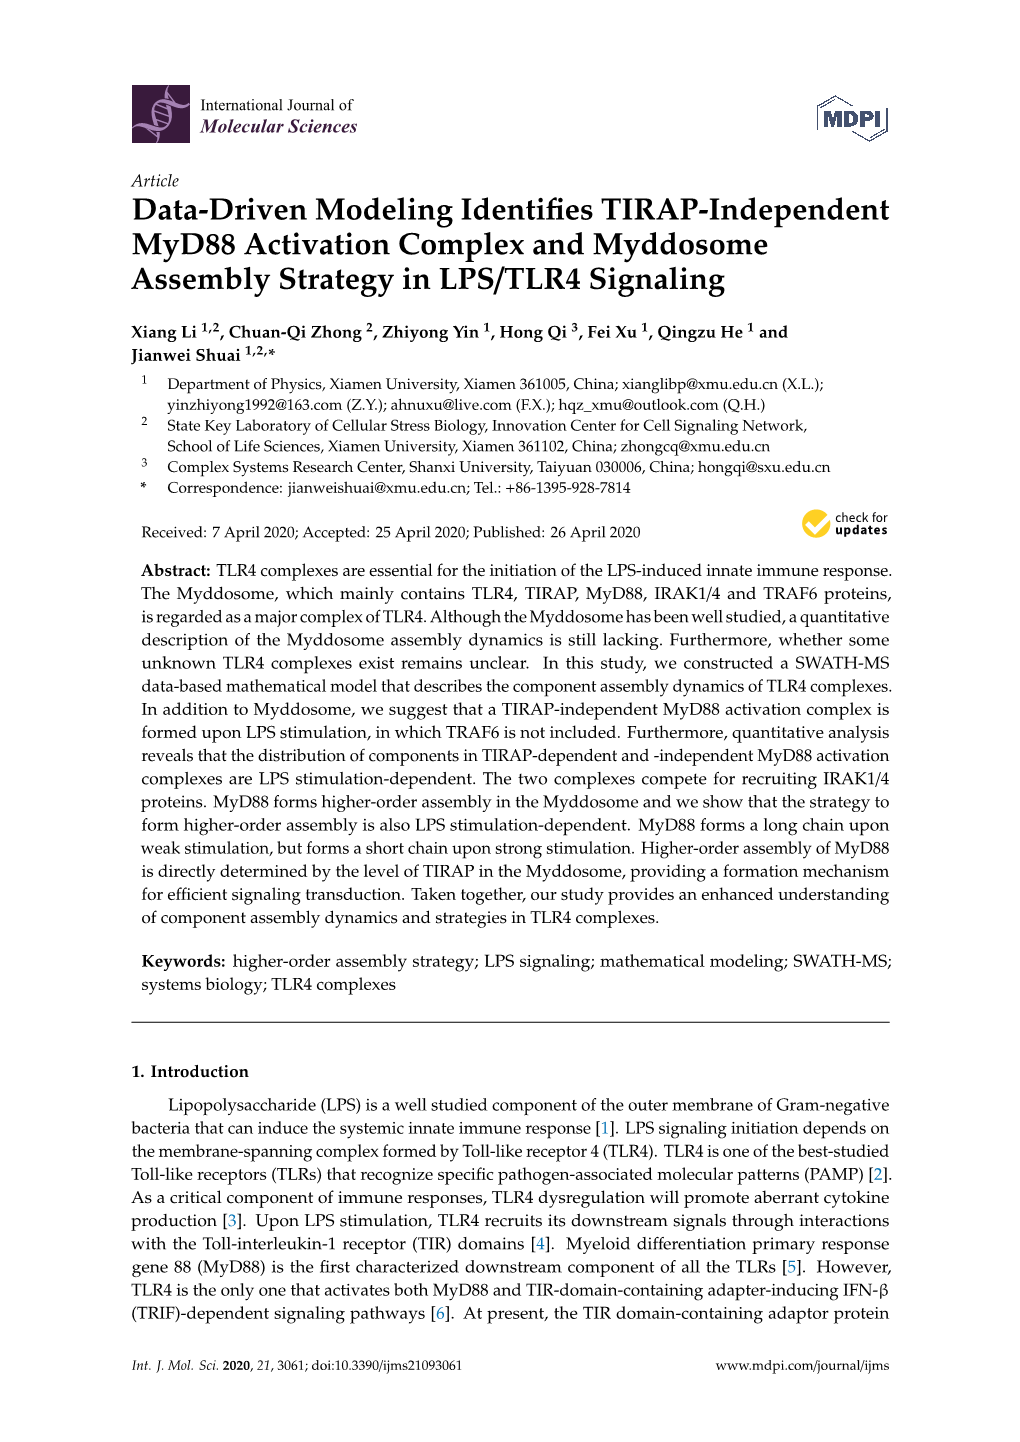 Data-Driven Modeling Identifies TIRAP-Independent Myd88